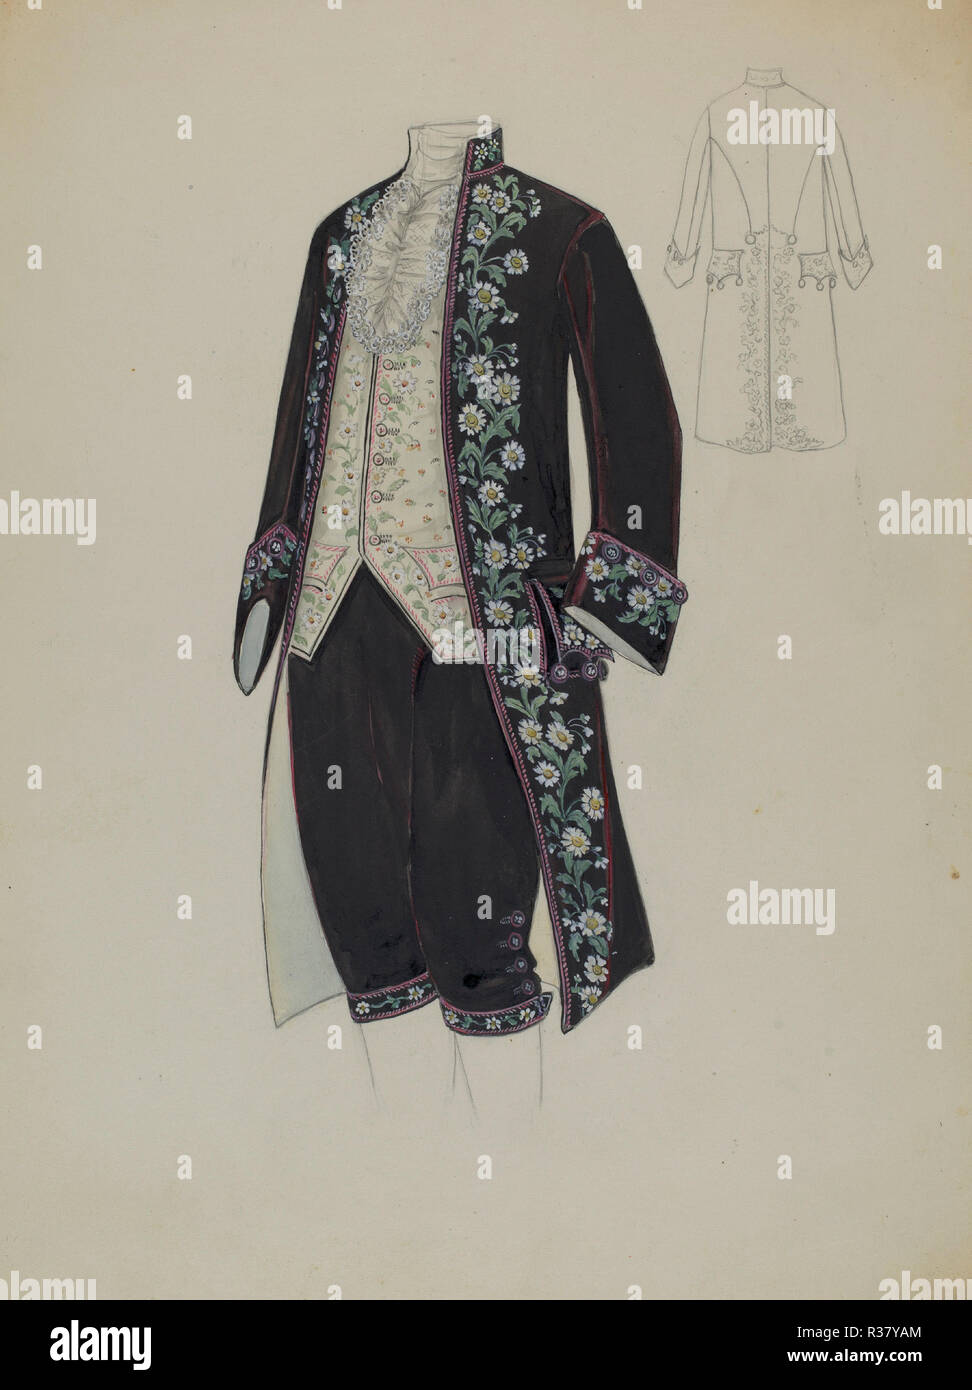 Man's Court Costume. Dated: c. 1936. Dimensions: overall: 30.2 x 23 cm (11 7/8 x 9 1/16 in.). Medium: watercolor, gouache, and graphite on paperboard. Museum: National Gallery of Art, Washington DC. Author: Jessie M. Benge. Stock Photo